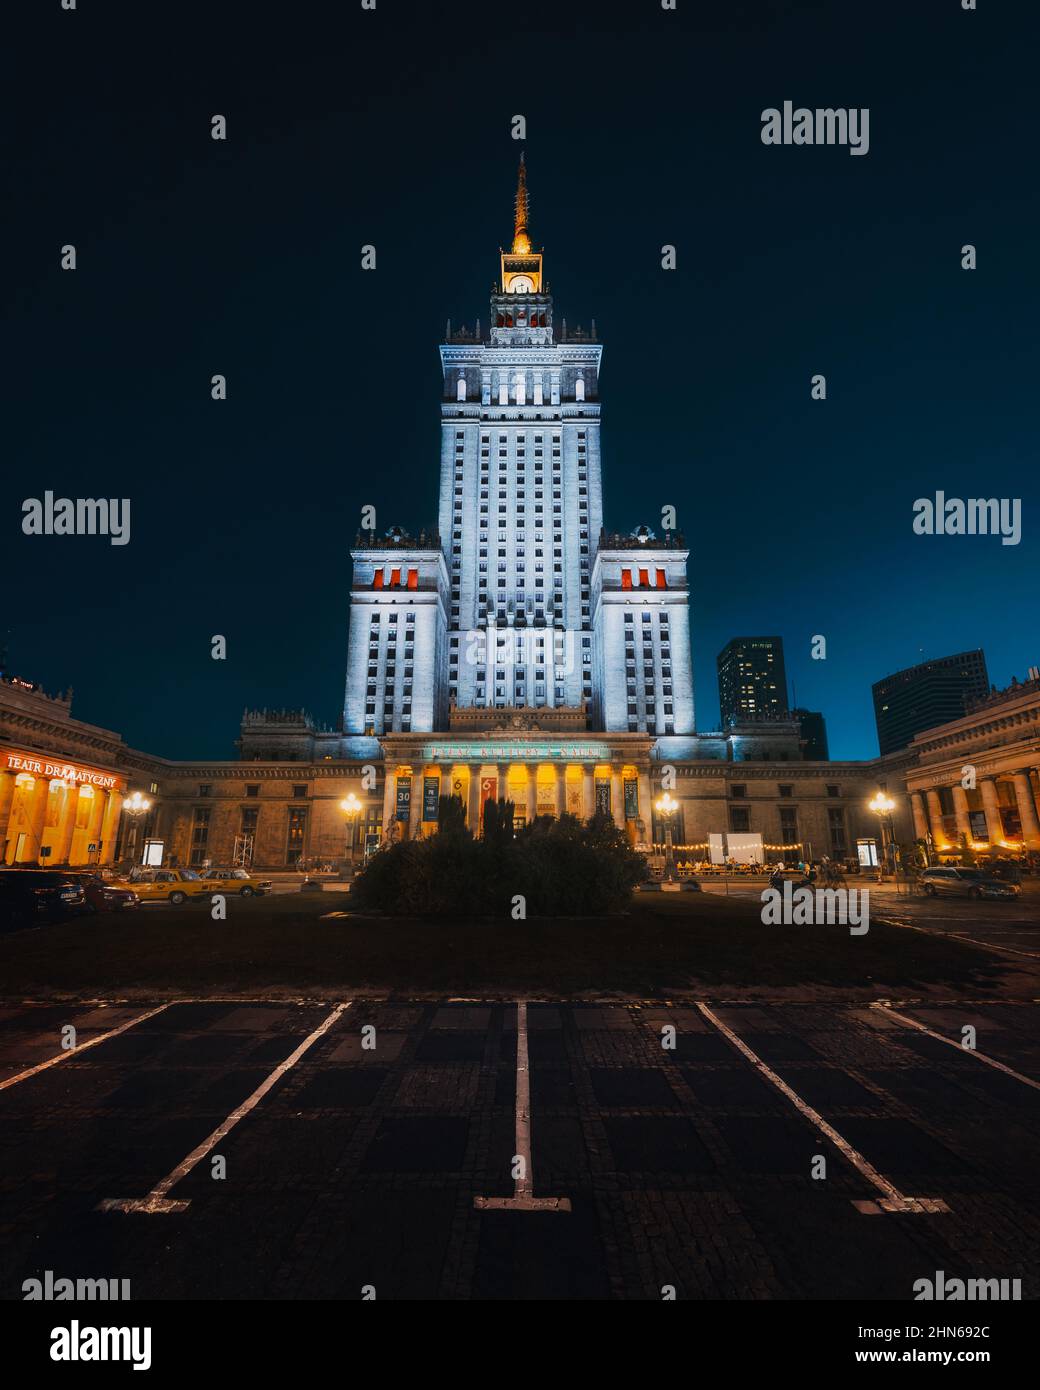 Palace of Culture and Science at night - Warsaw, Poland Stock Photo